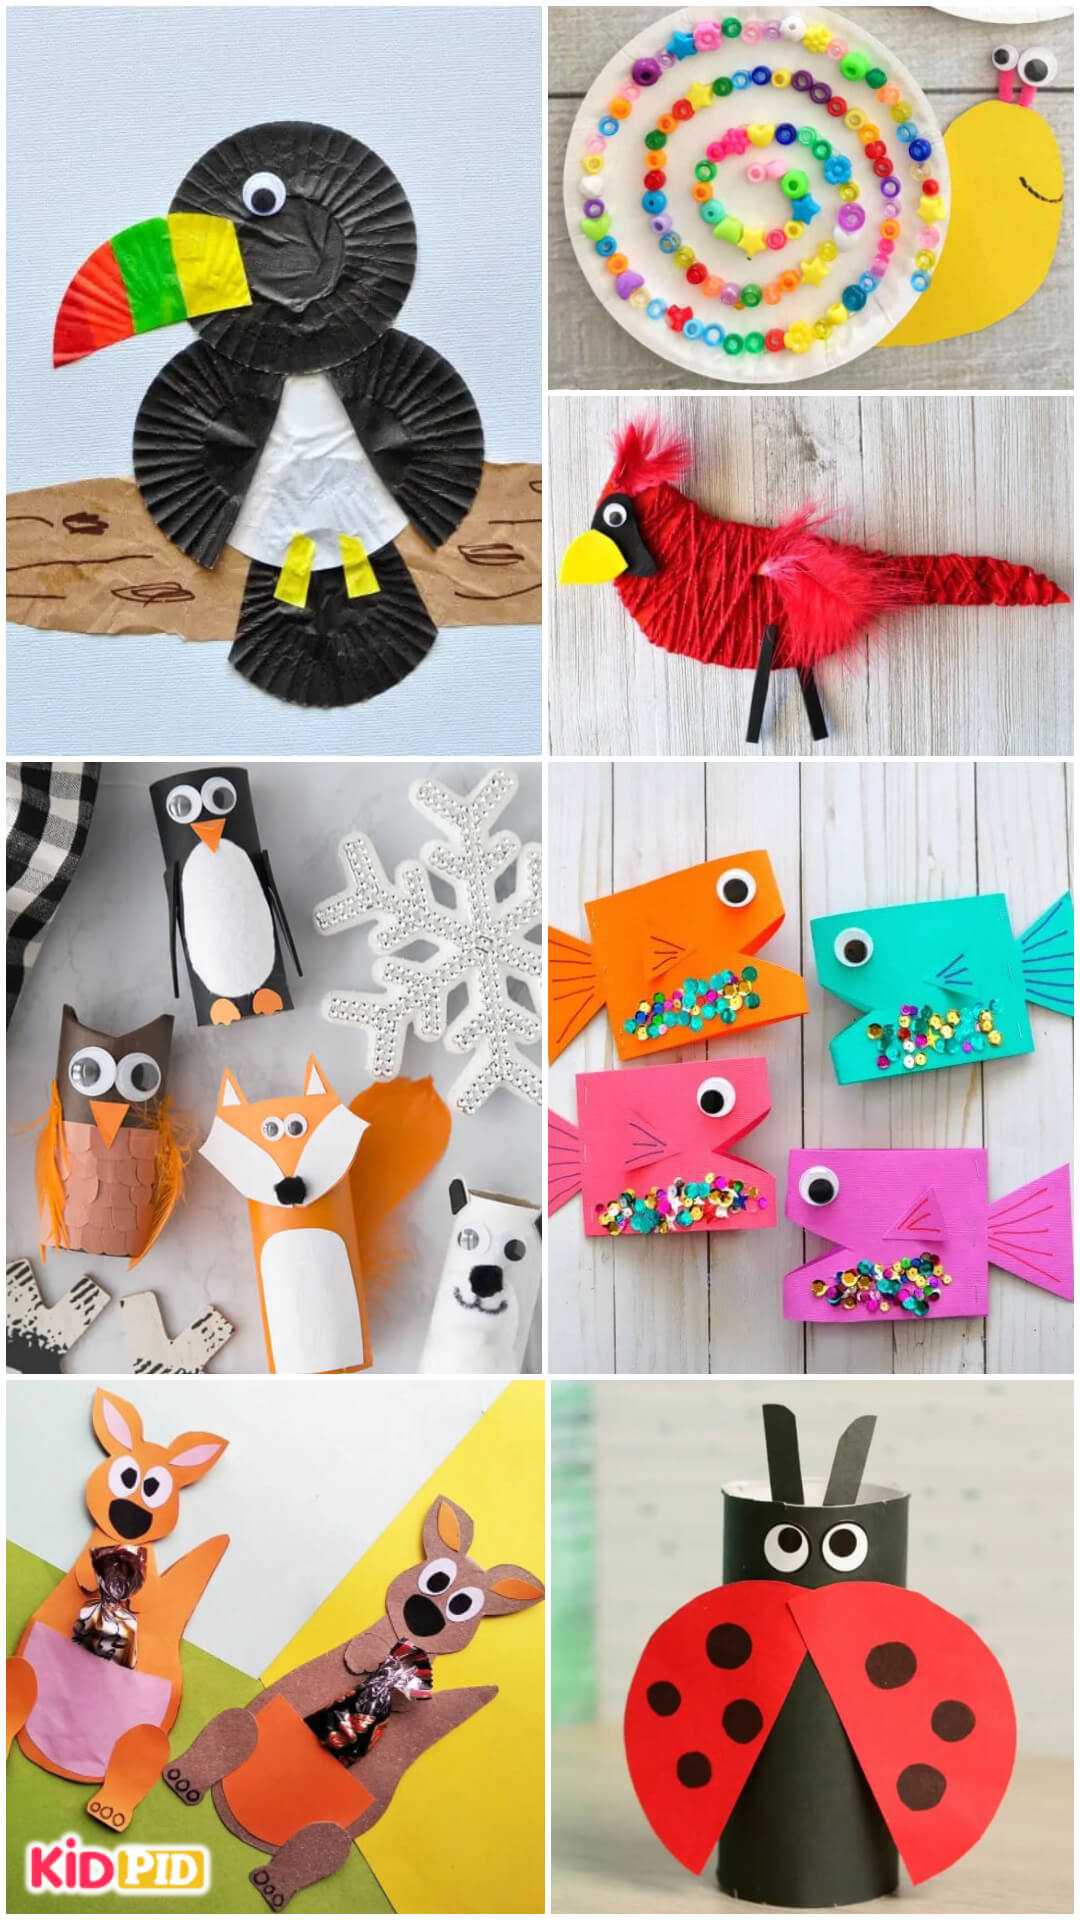 Animal Crafts For Kids to Make at Home